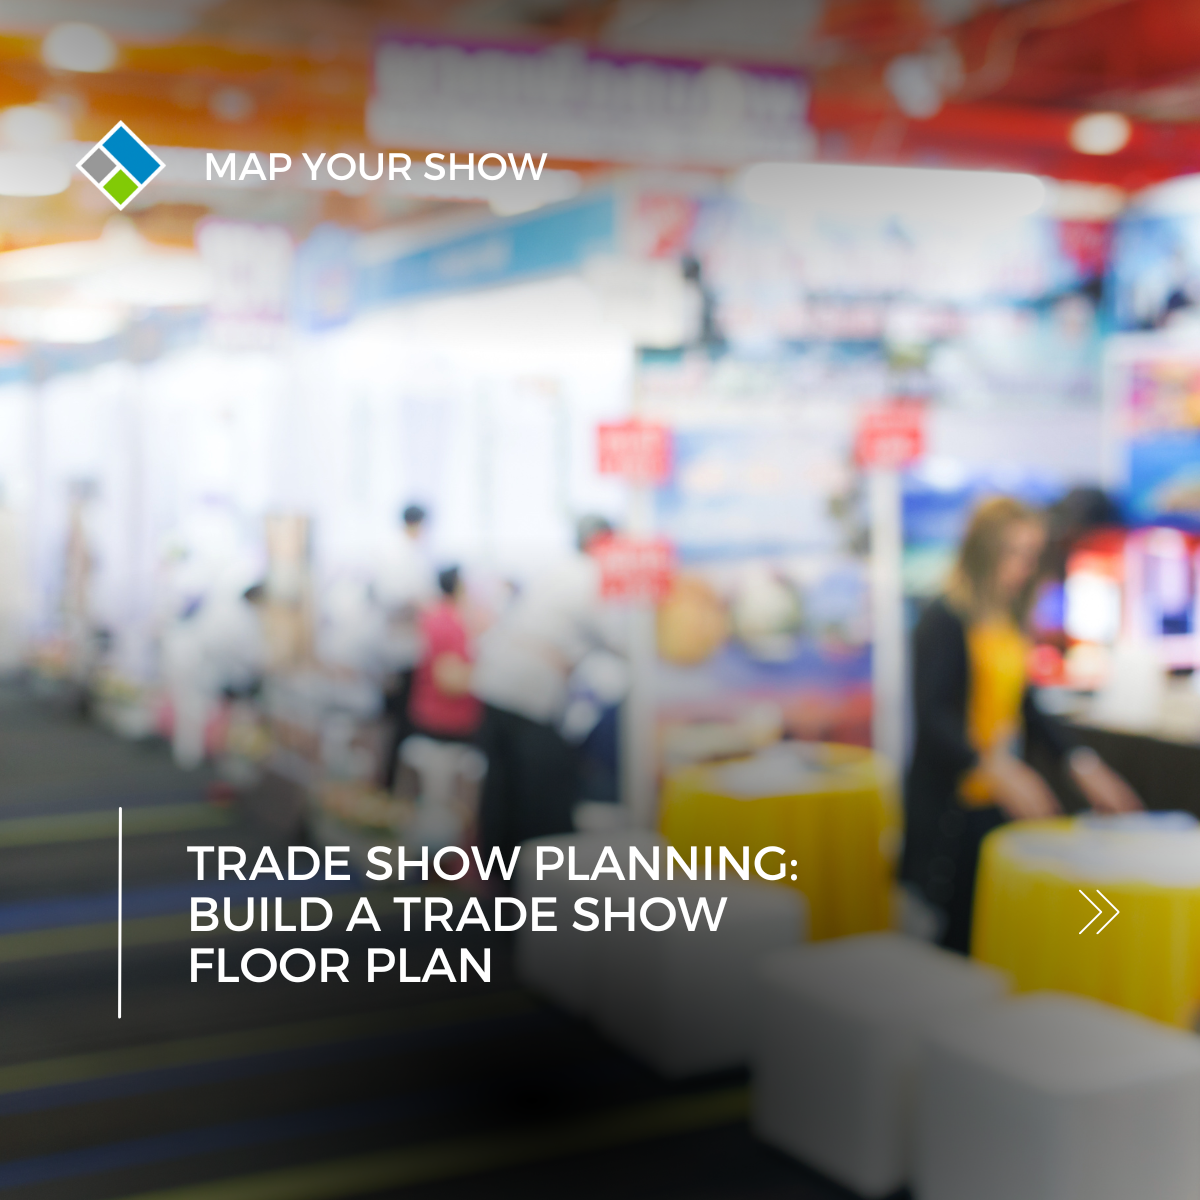 Trade Show Planning: Build a Trade Show Floor Plan. Map Your Show, Event Management Technology